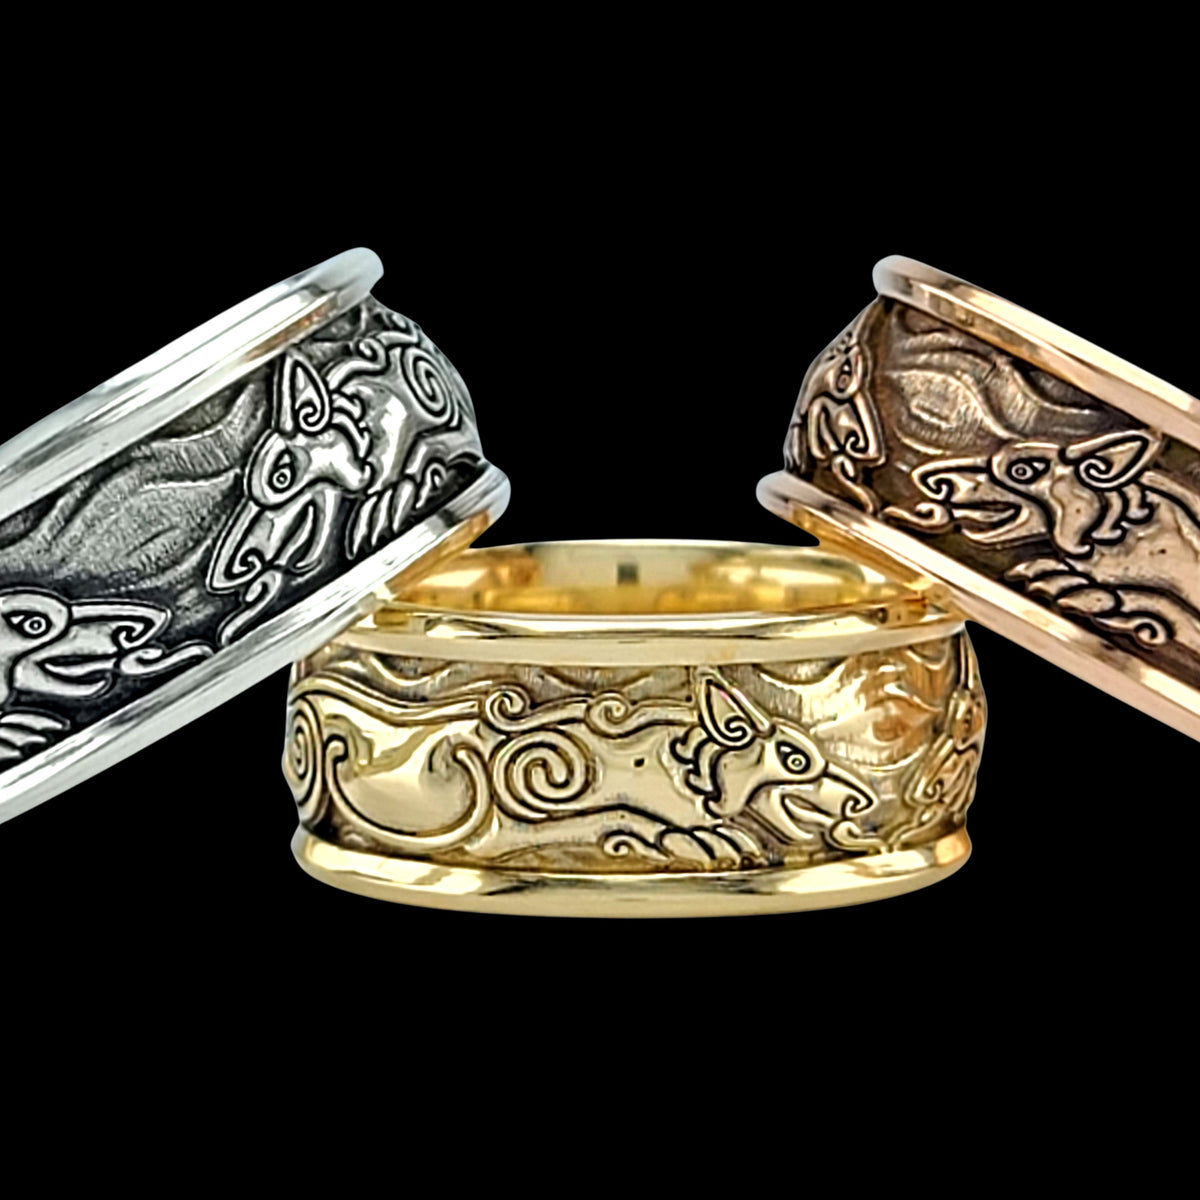 FENRIR THE WOLF Band Ring - Starting at $184